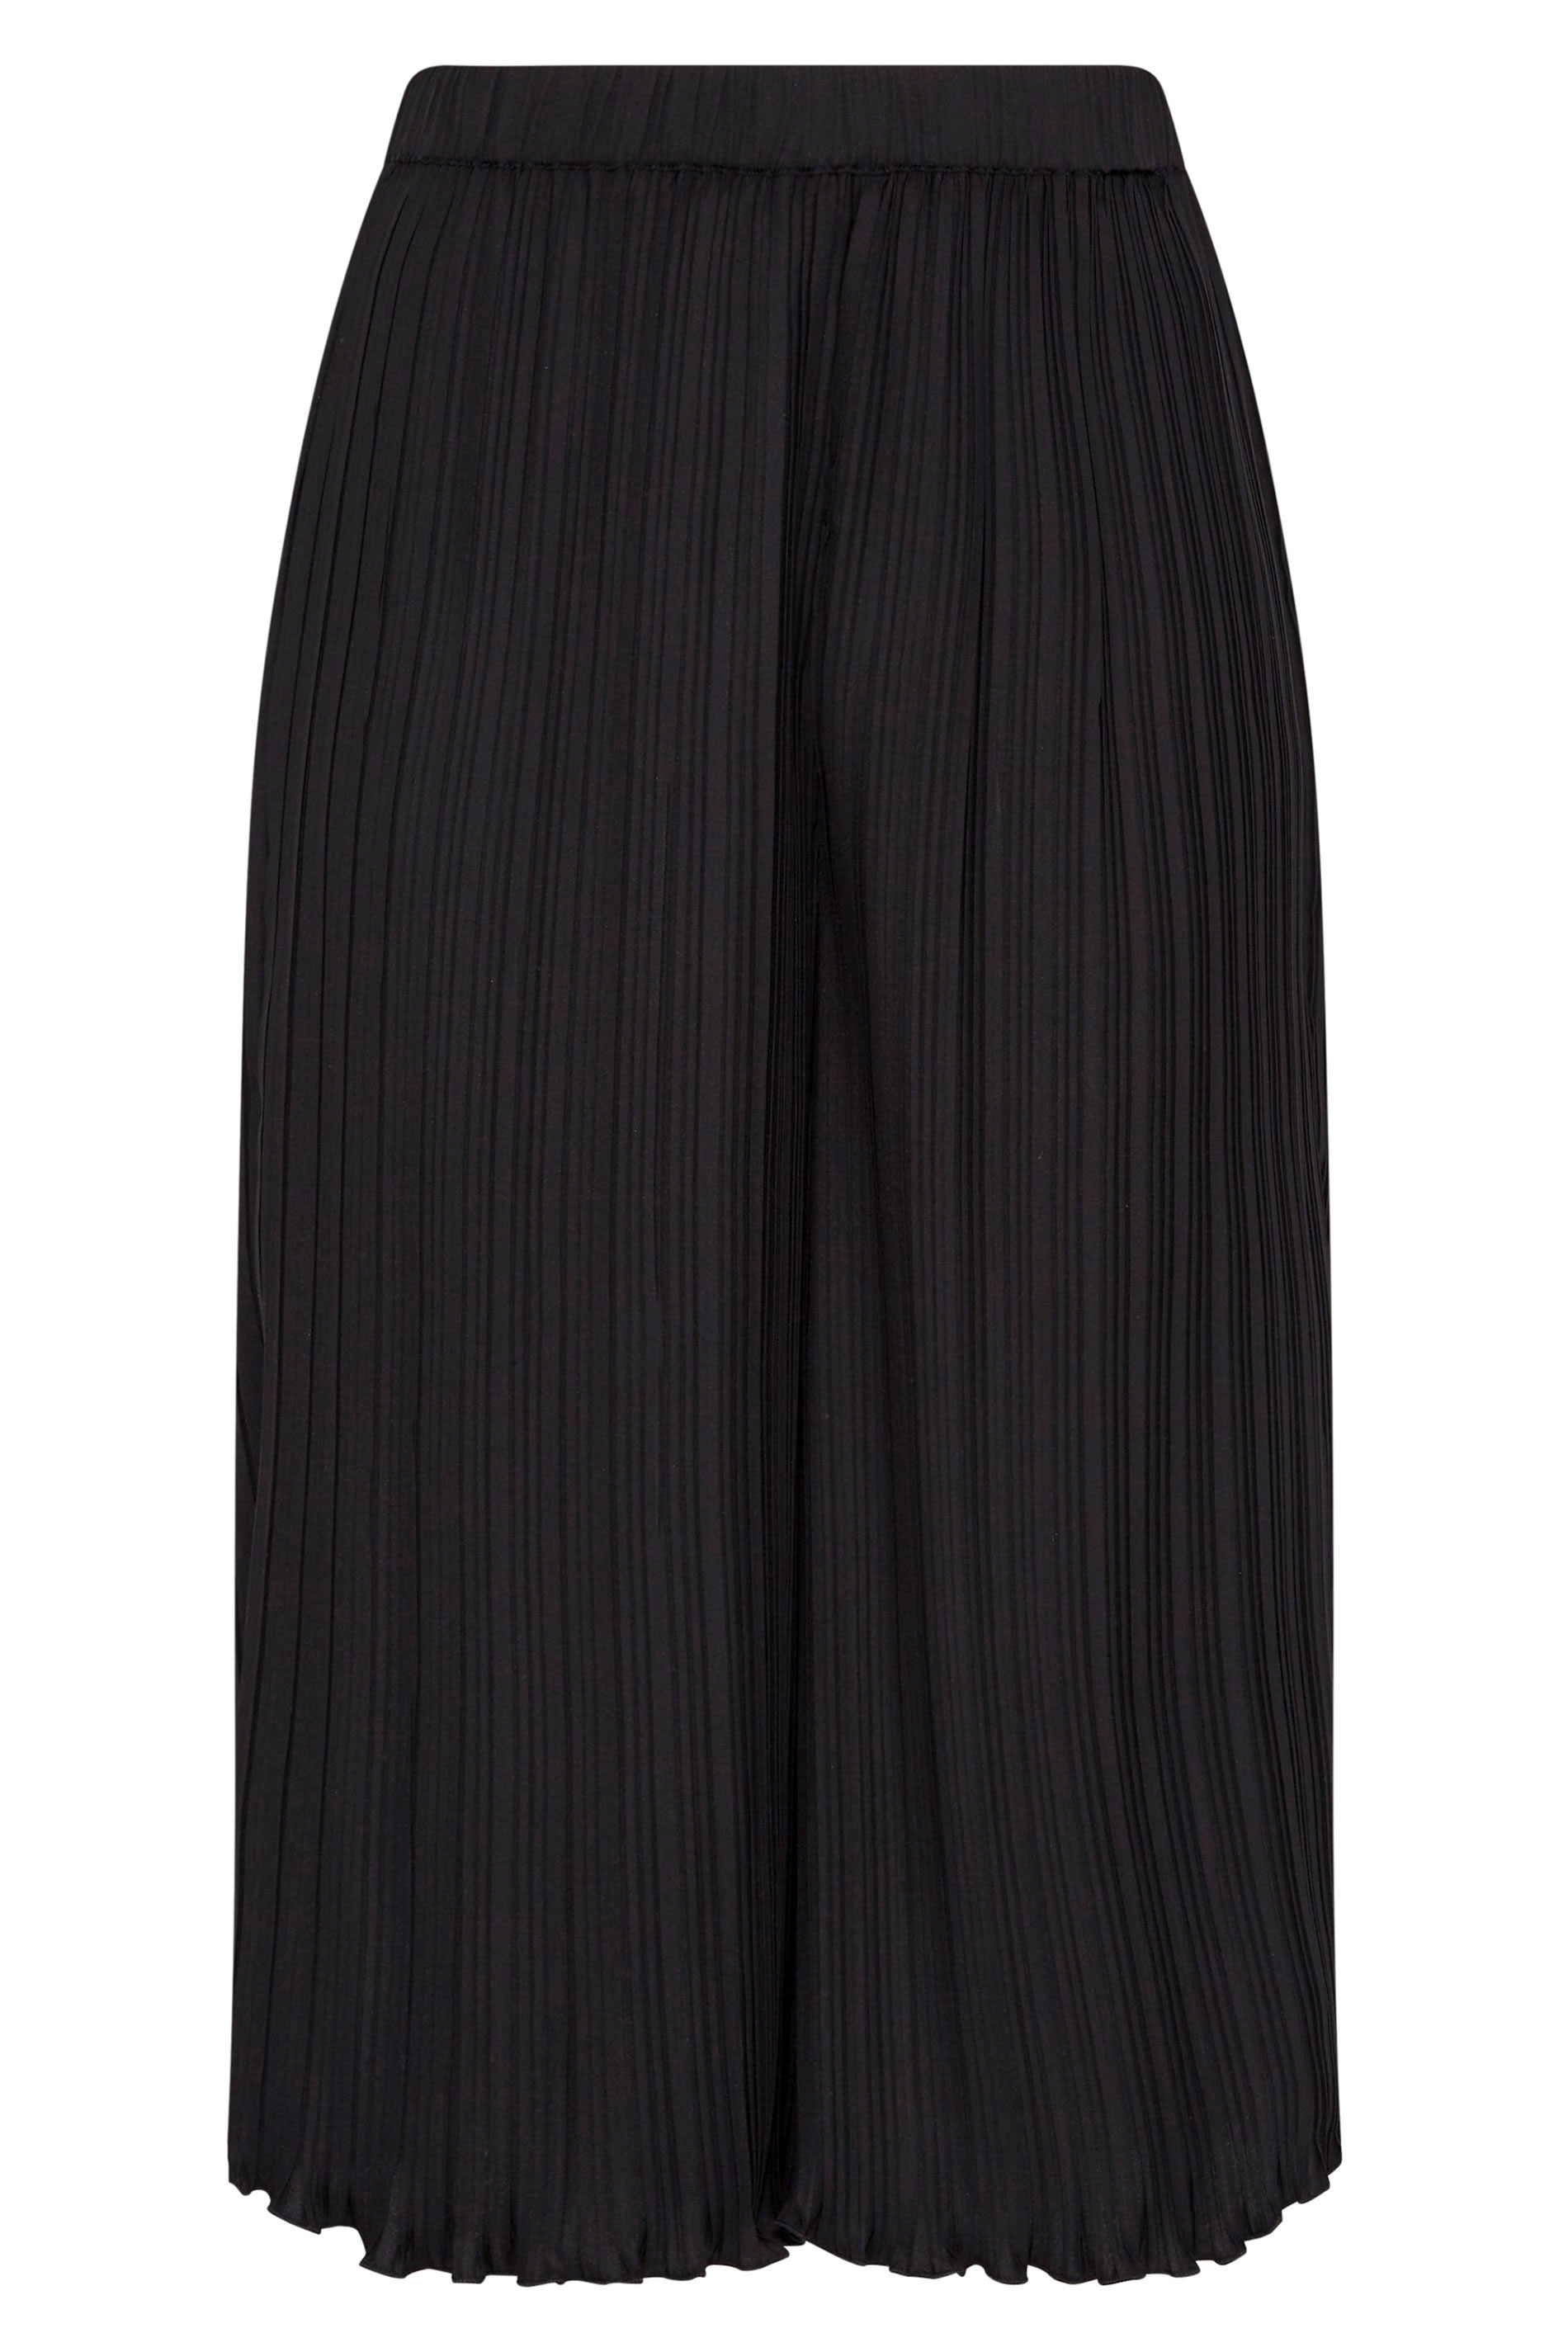 YOURS LONDON Plus Size Black Pleated Culottes | Yours Clothing 3